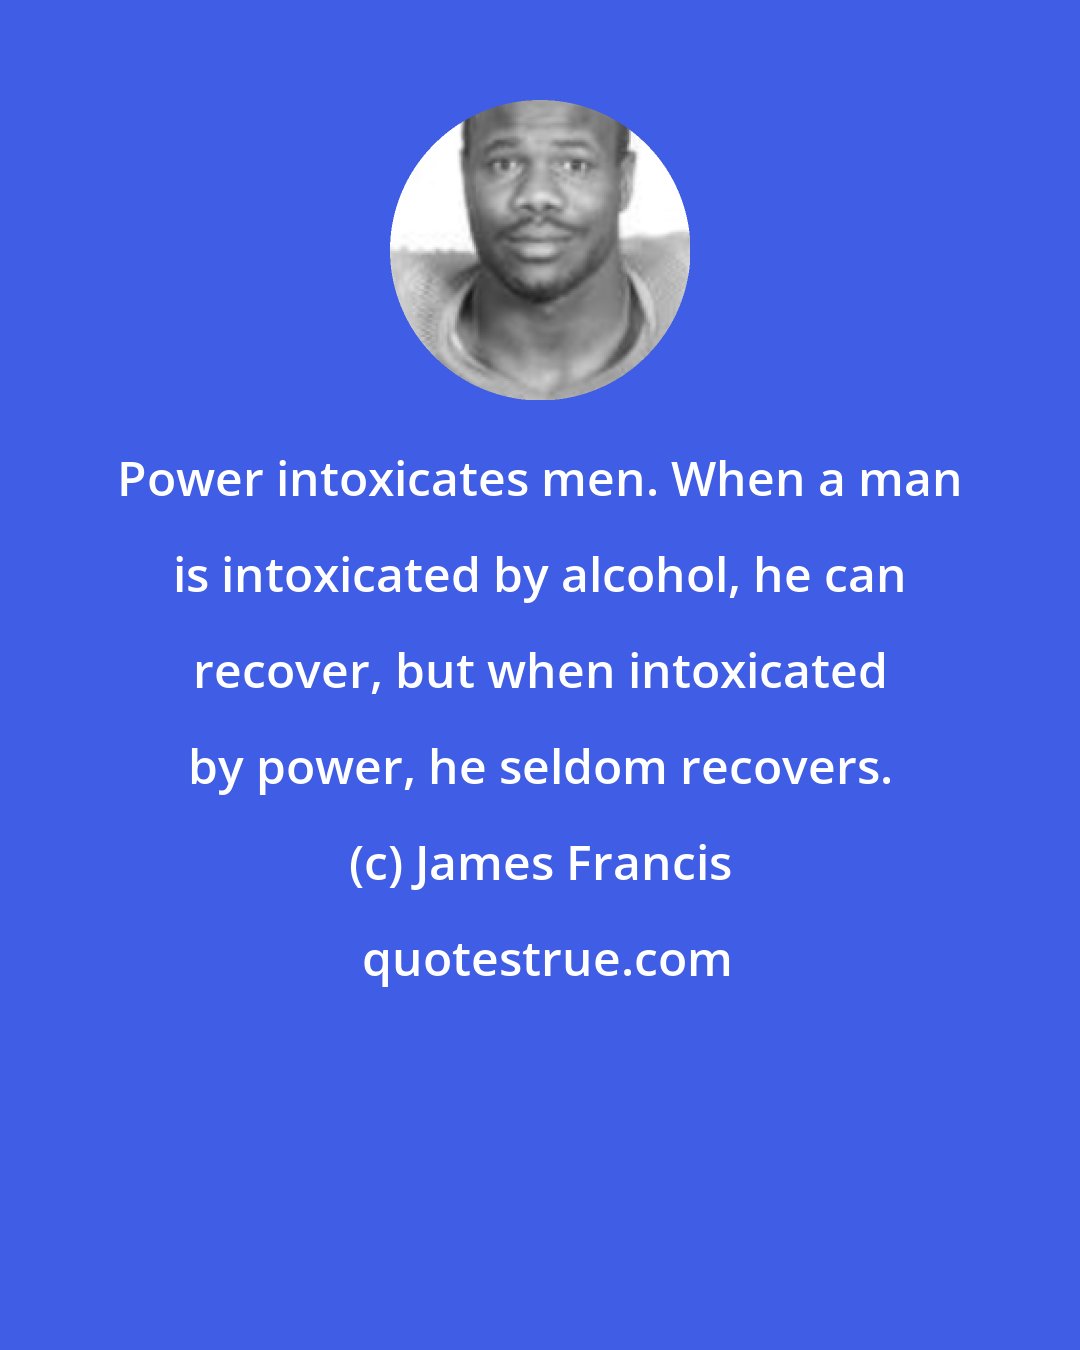 James Francis: Power intoxicates men. When a man is intoxicated by alcohol, he can recover, but when intoxicated by power, he seldom recovers.